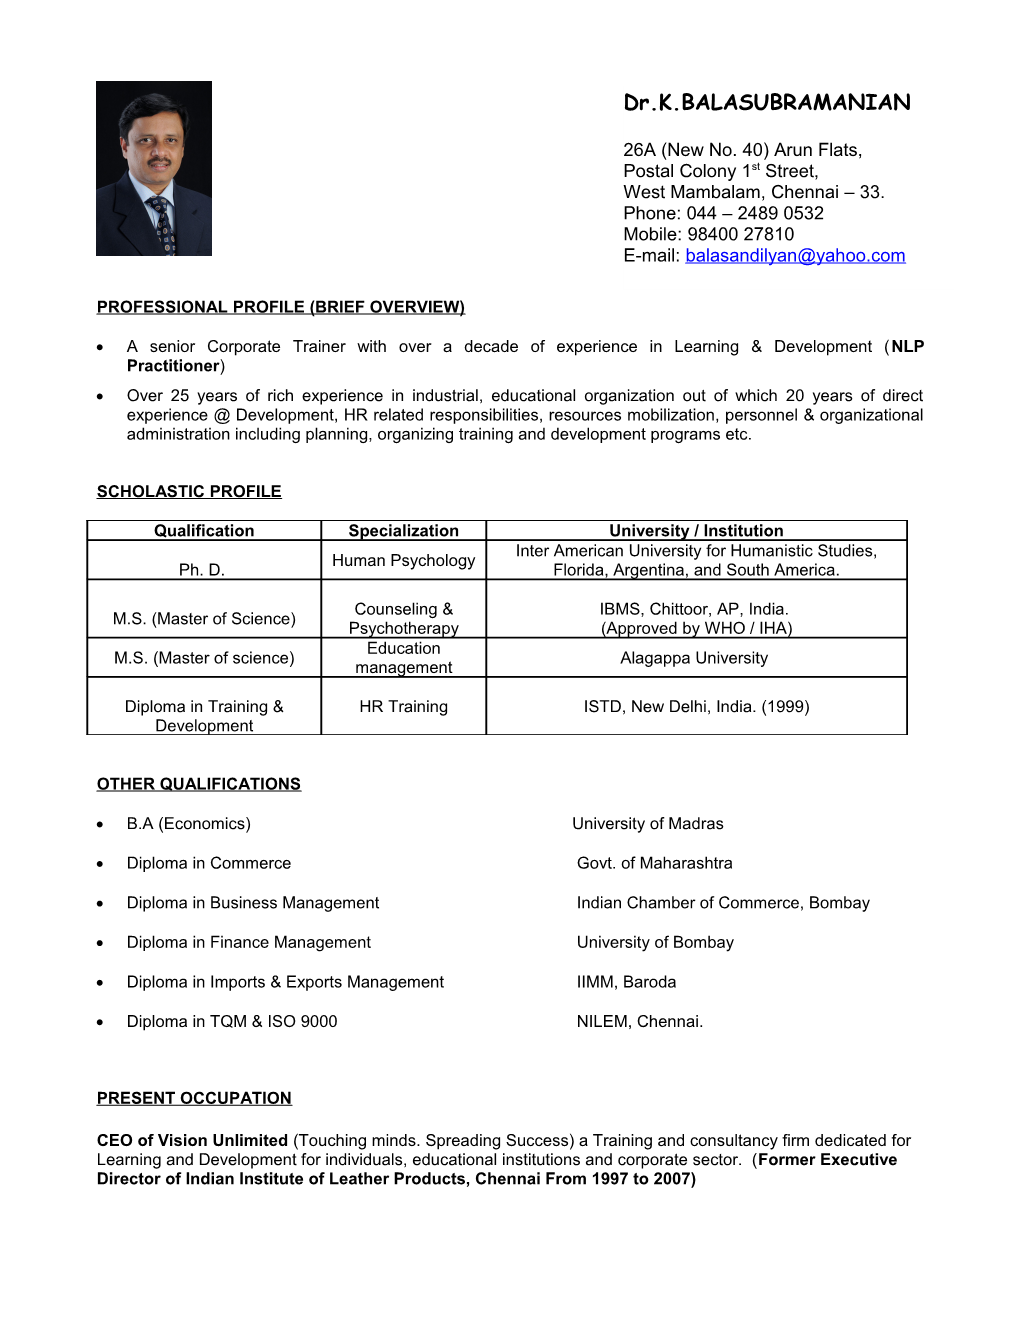 Professional Profile (Brief Overview)